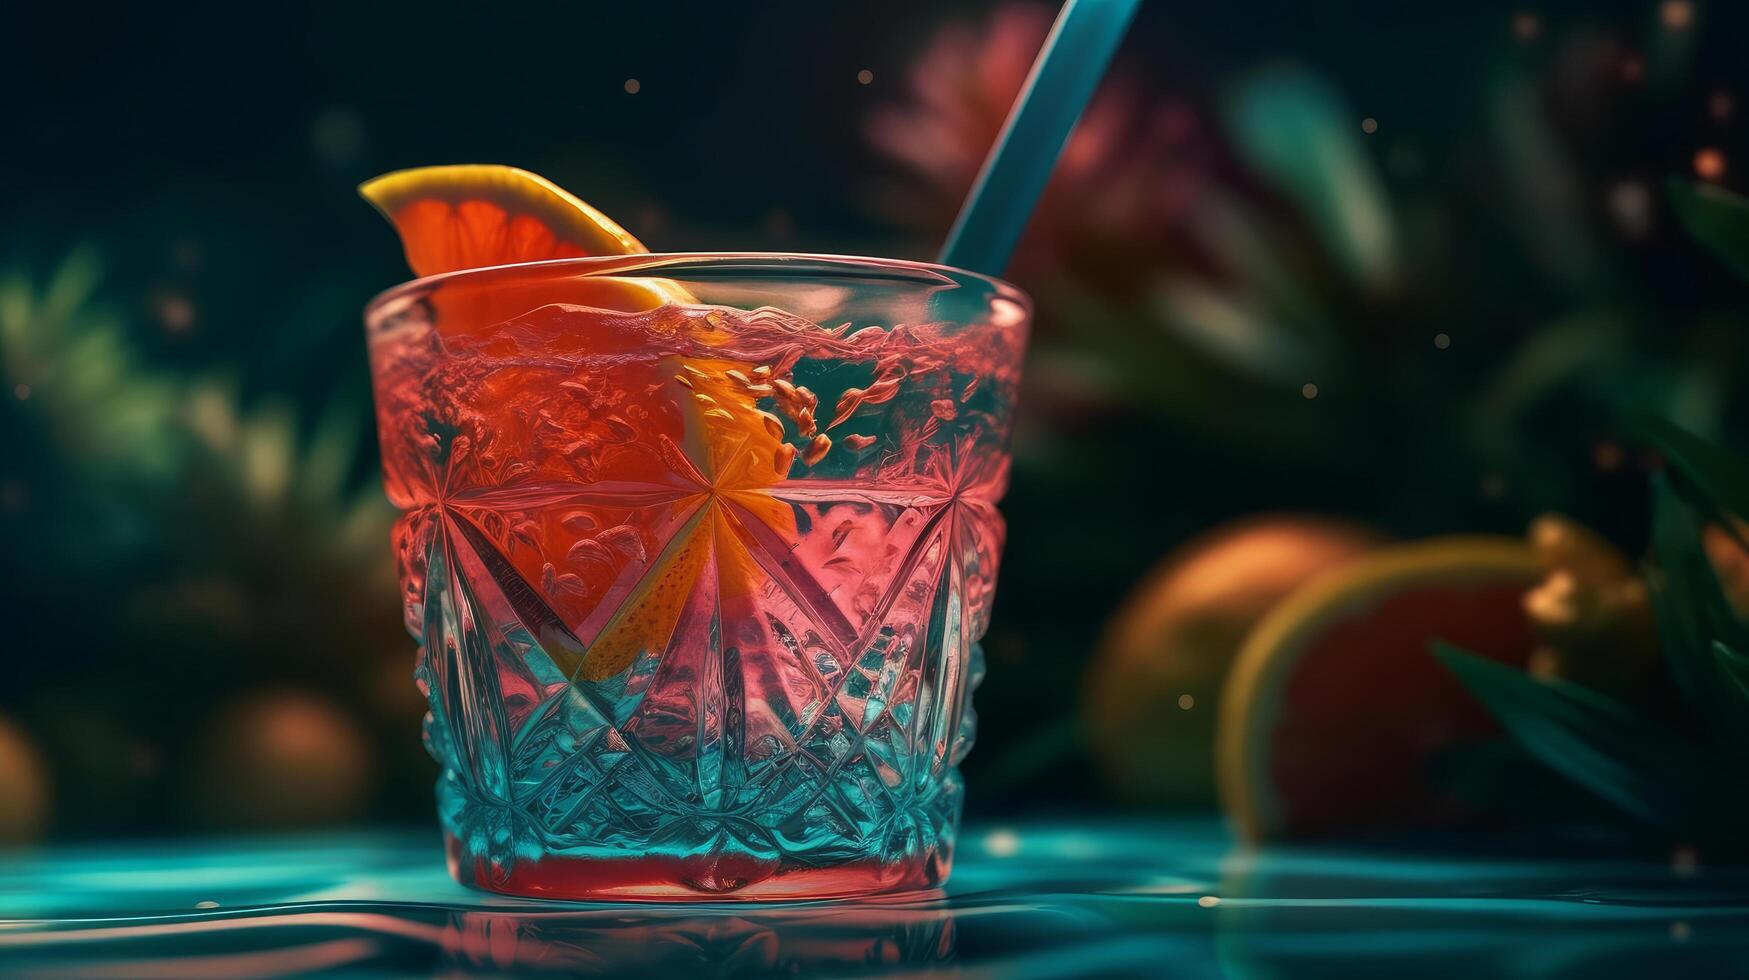 Summer vivid background with cocktail. Illustration photo